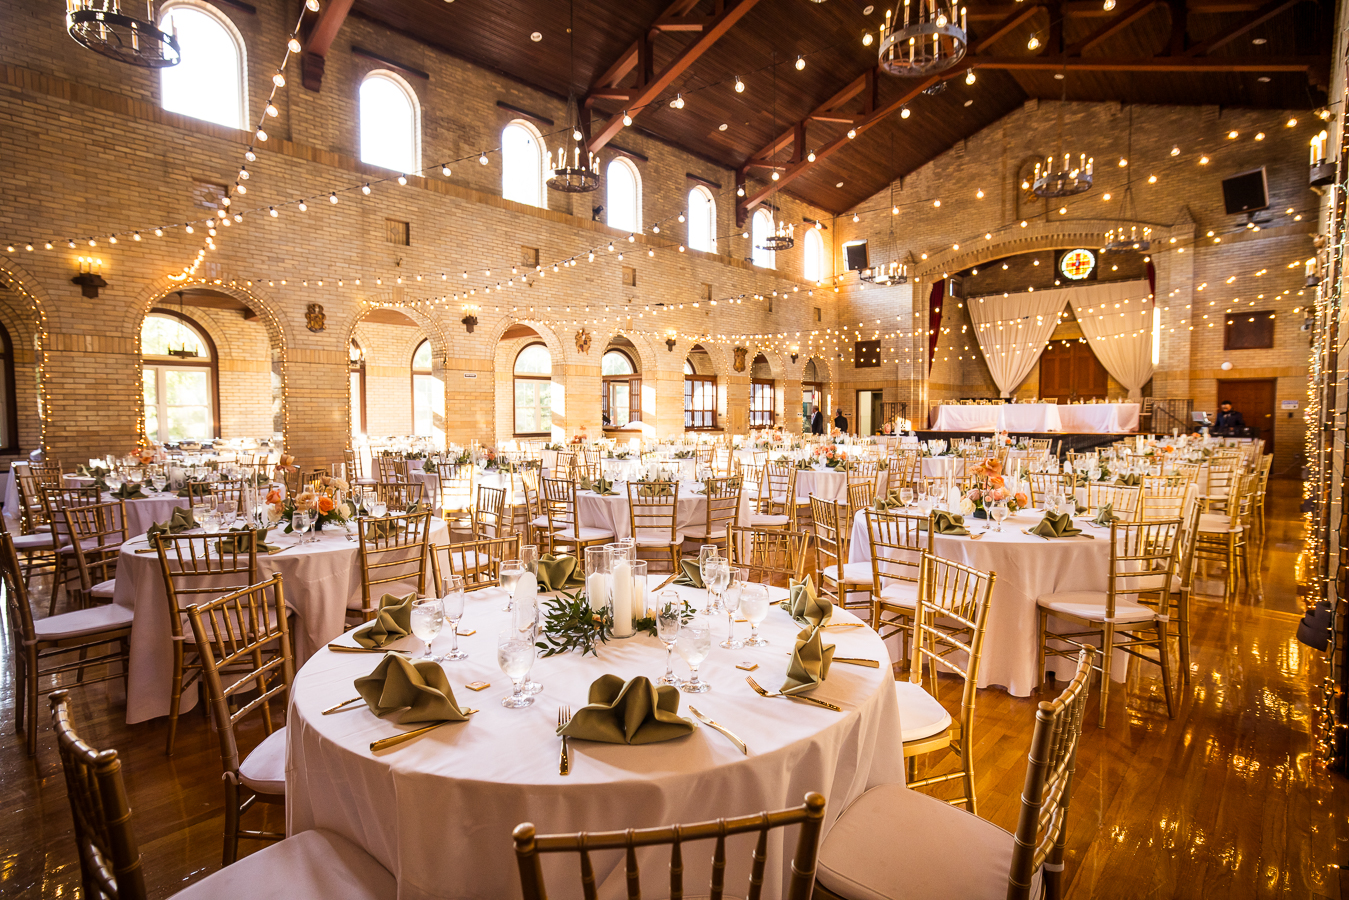 st francis hall wedding photographer, Lisa Rhinehart, captures this image of the inside of the venue decorated for this Multicultural DC Wedding reception in Washington DC